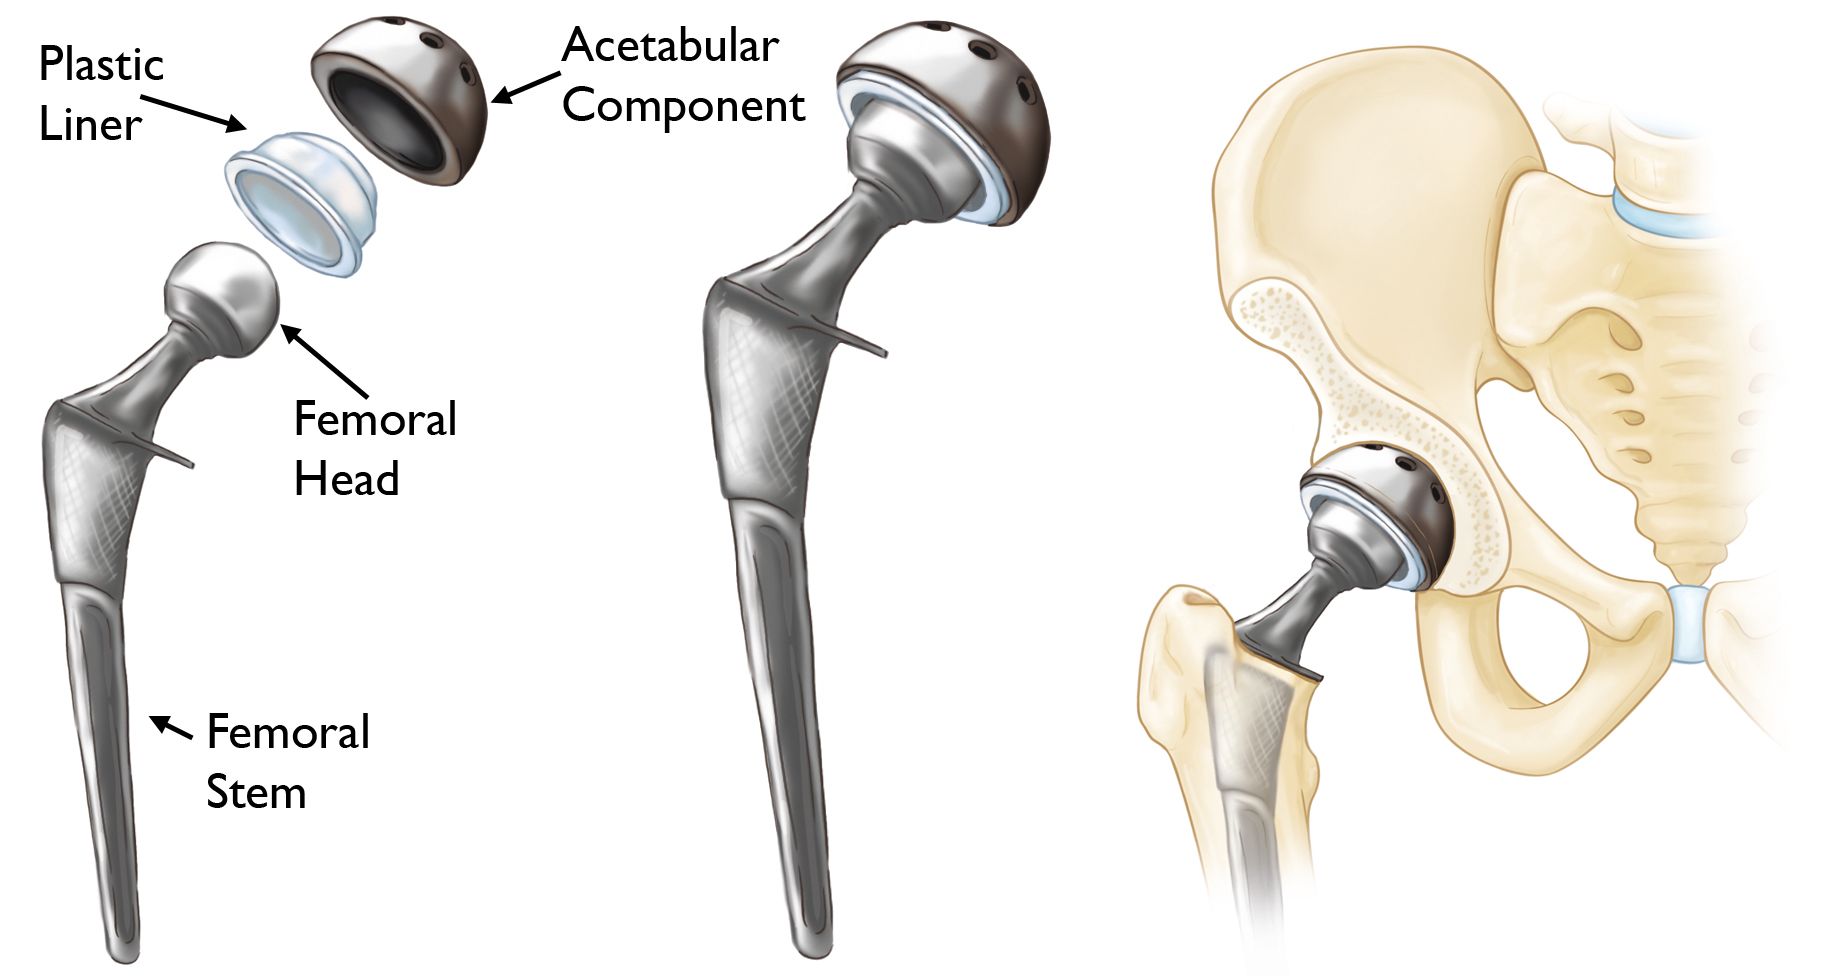 Total hip replacement implants